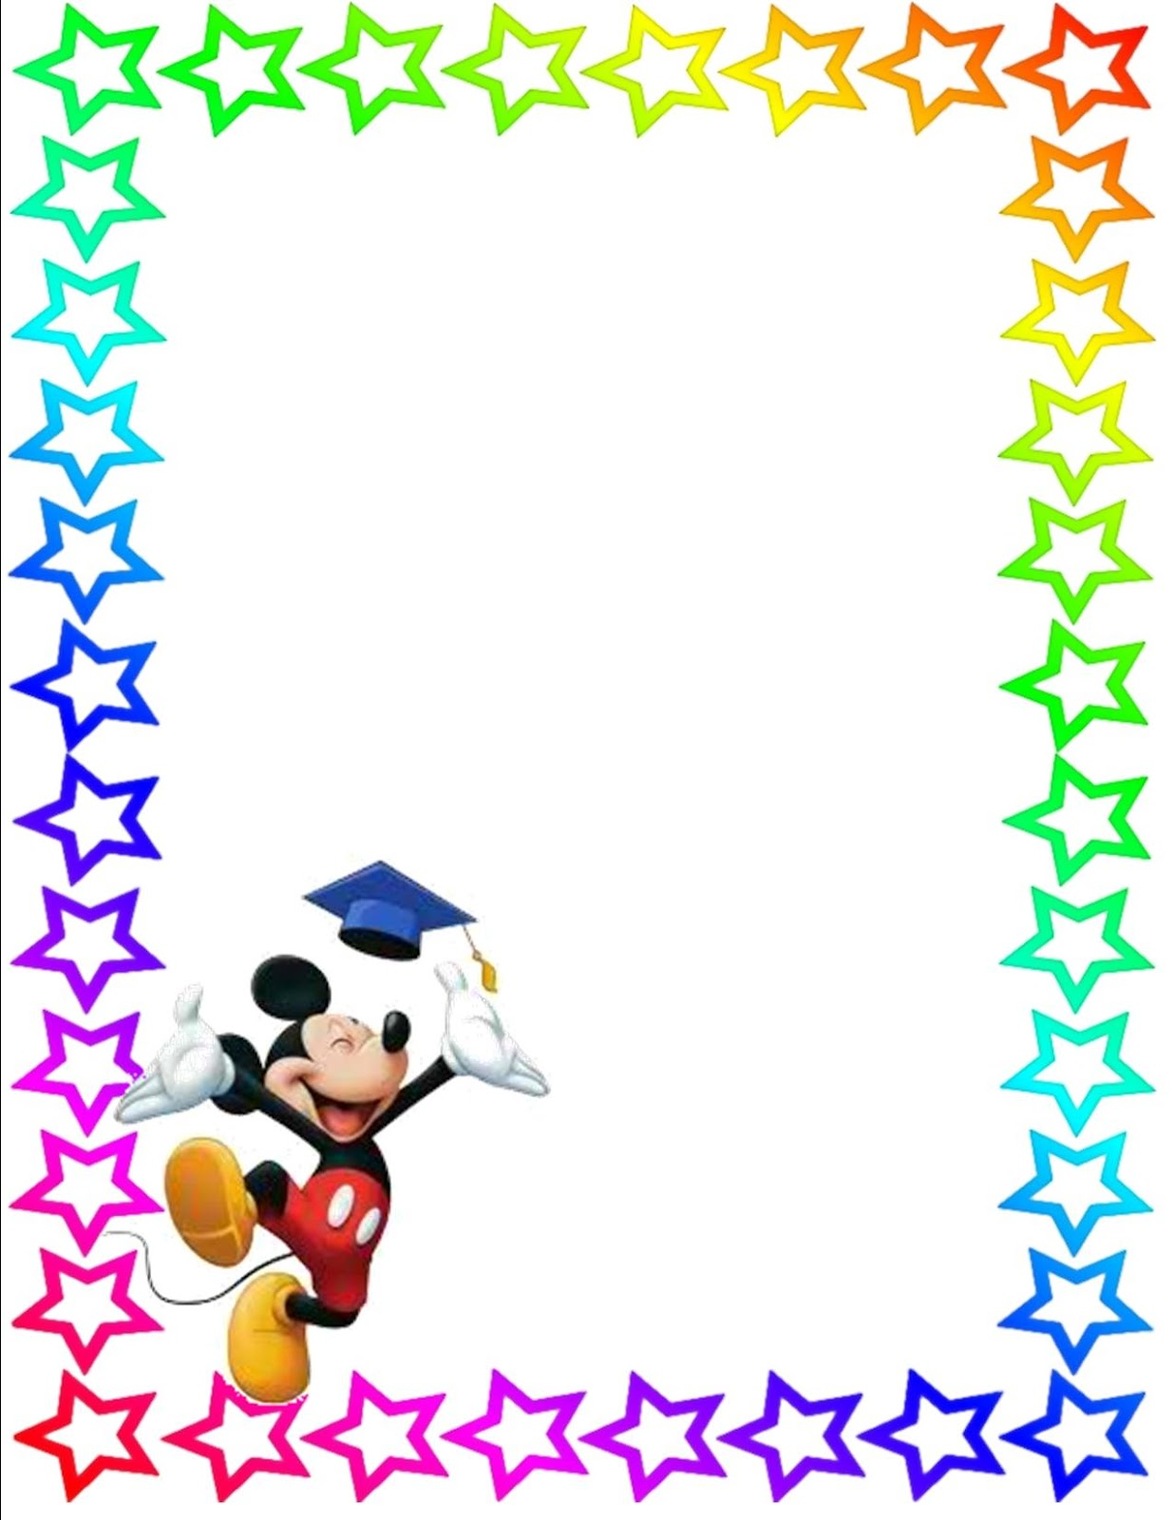 Crayon Border For Microsoft Word Clipart - Free to use Clip Art ...